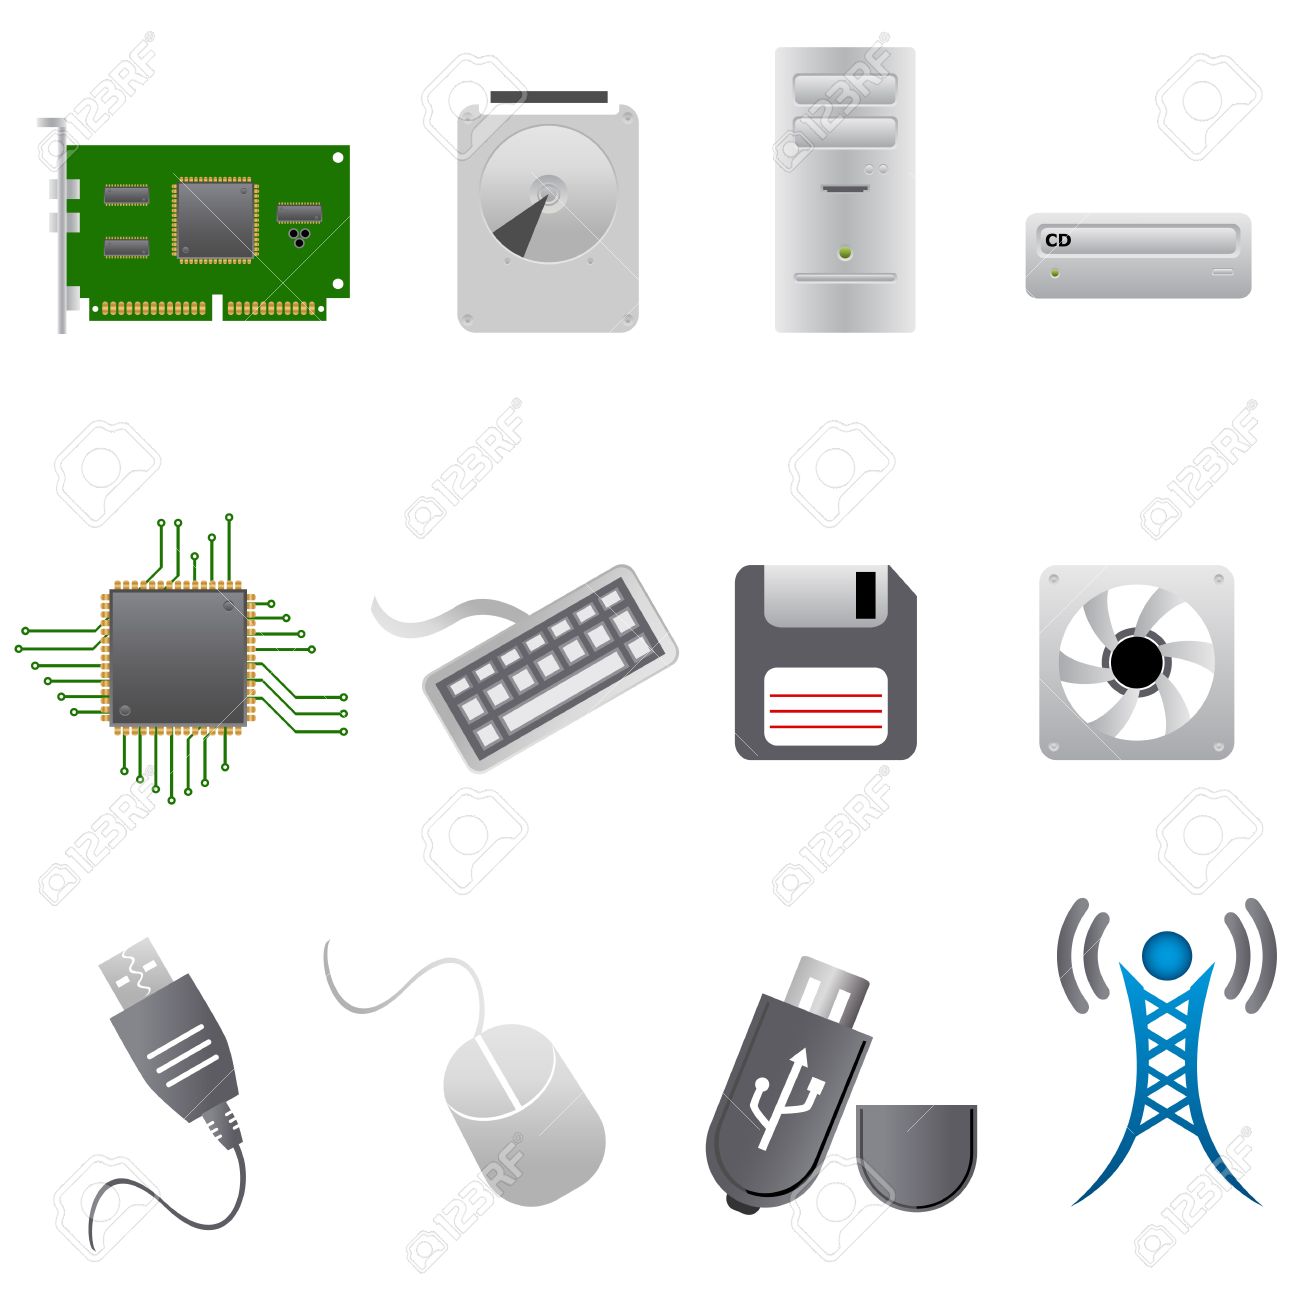 Computer Parts, Hardware And Peripherals Royalty Free Cliparts.